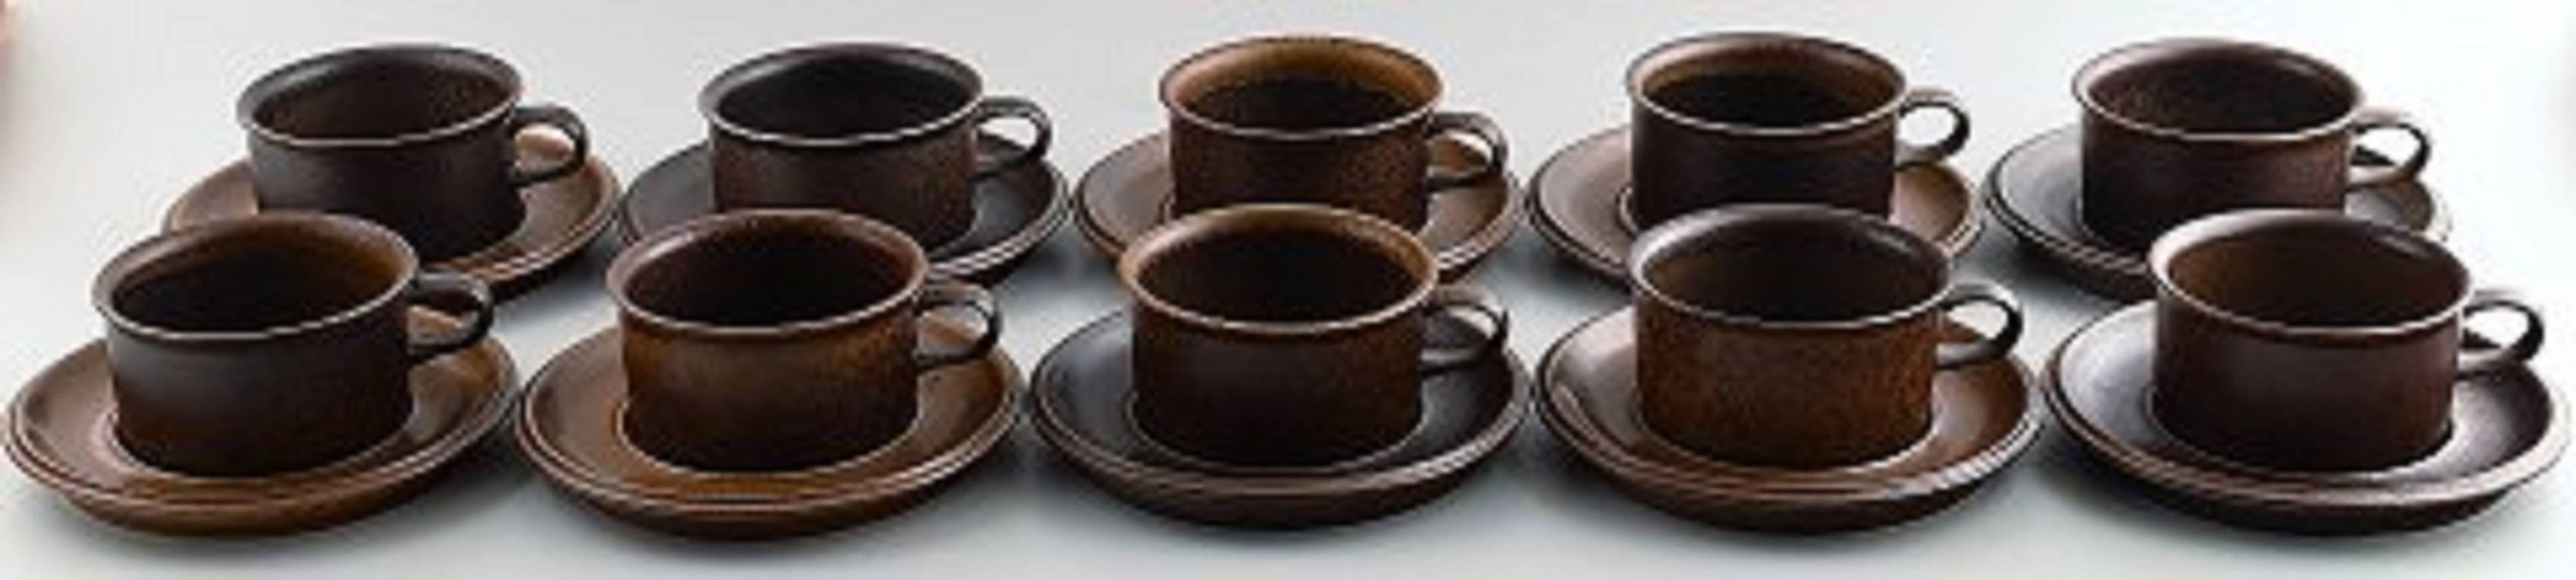 Complete 10 p. Arabia Ruska stoneware tea service.

Finnish Design, 1960-1970s.

Consisting of a teapot, ten teacups 8 x 5 cm. With saucers and a creamer or milk jug.

In perfect condition.